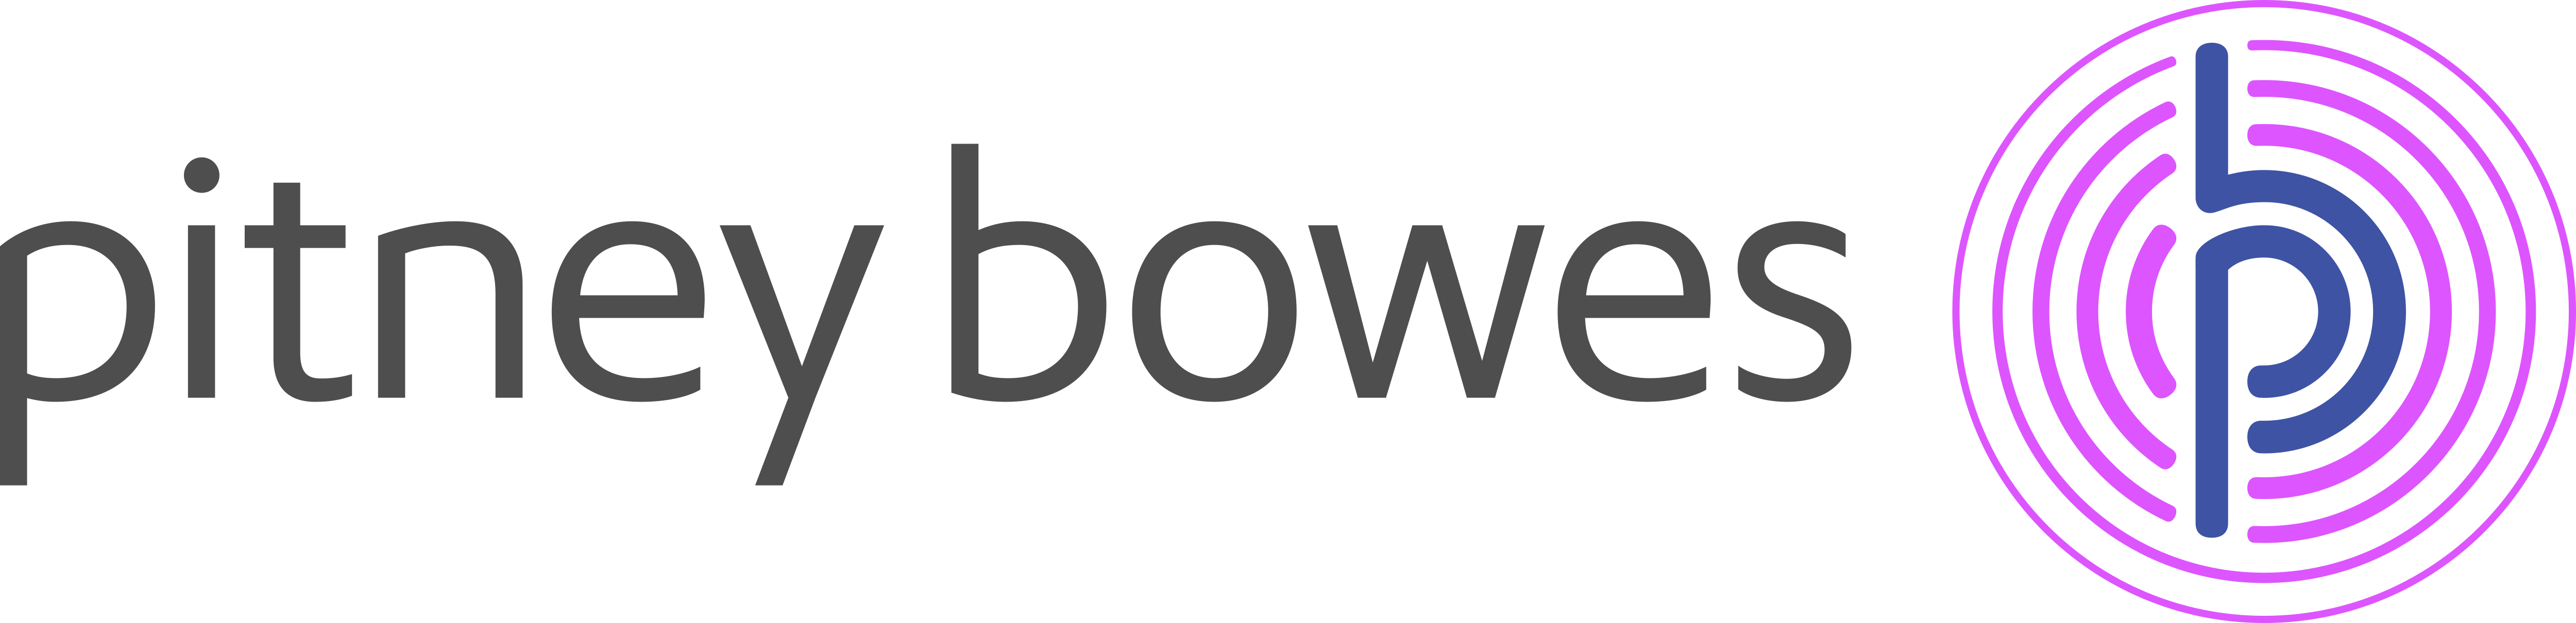 Pitney Bowes Colors